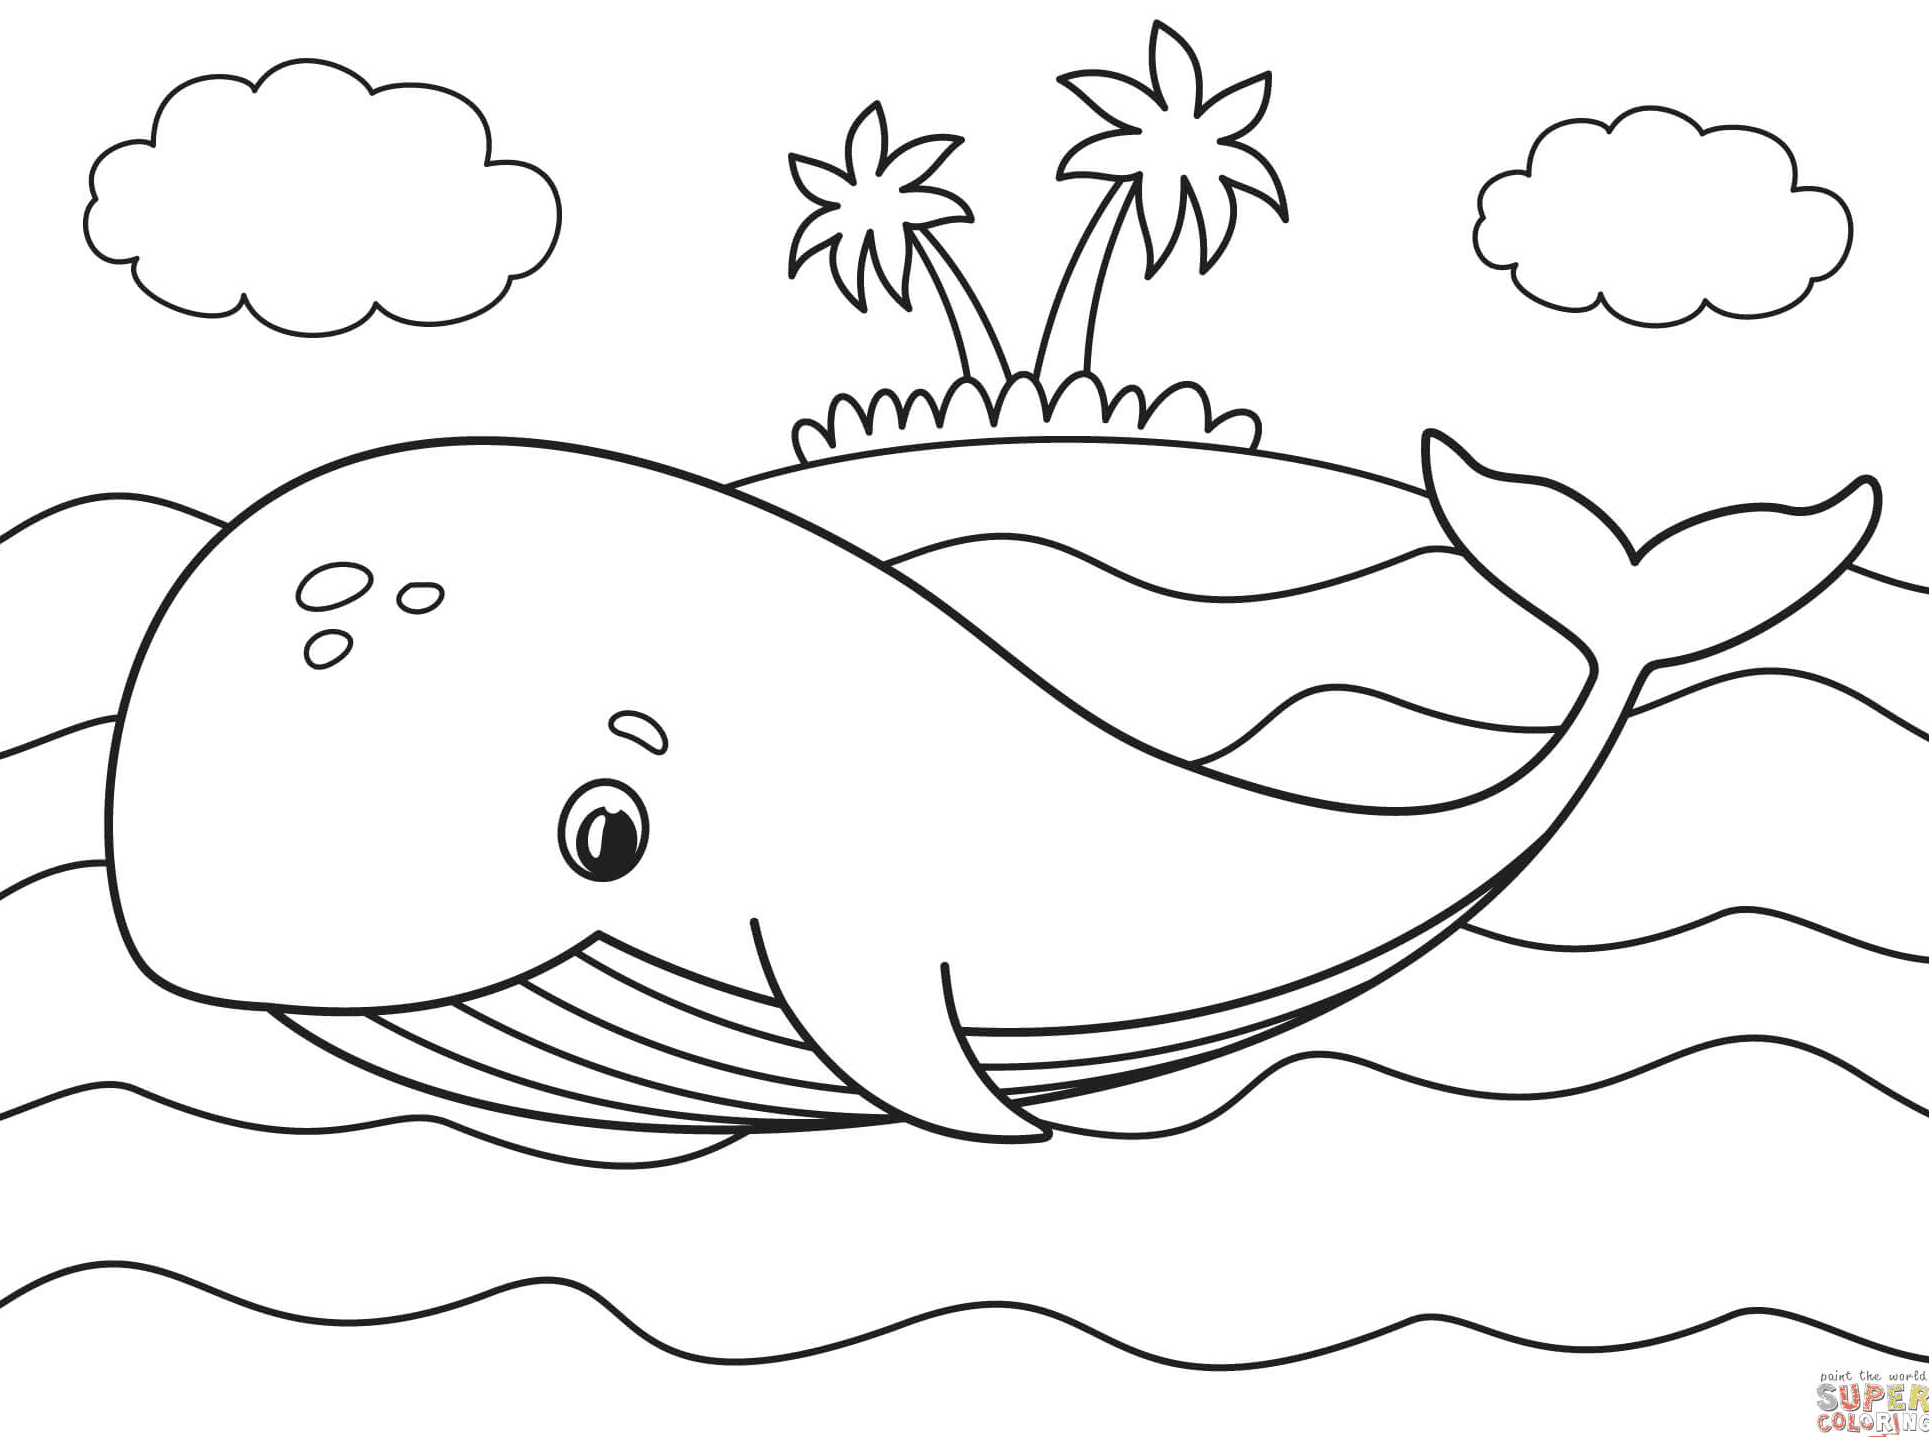 Whale Printable Coloring Page